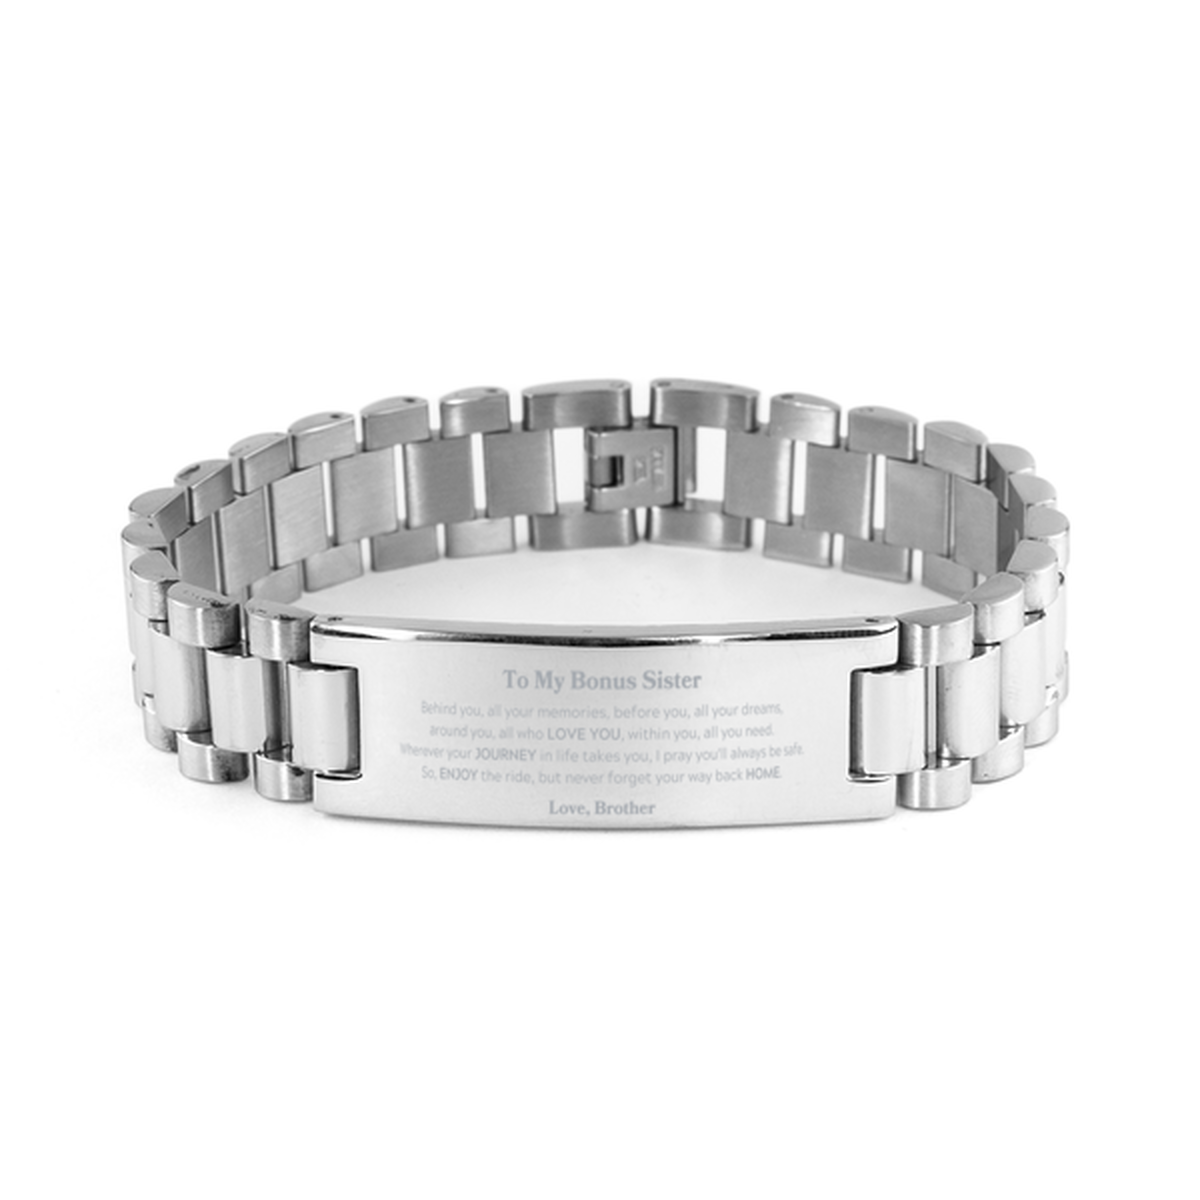 To My Bonus Sister Graduation Gifts from Brother, Bonus Sister Ladder Stainless Steel Bracelet Christmas Birthday Gifts for Bonus Sister Behind you, all your memories, before you, all your dreams. Love, Brother